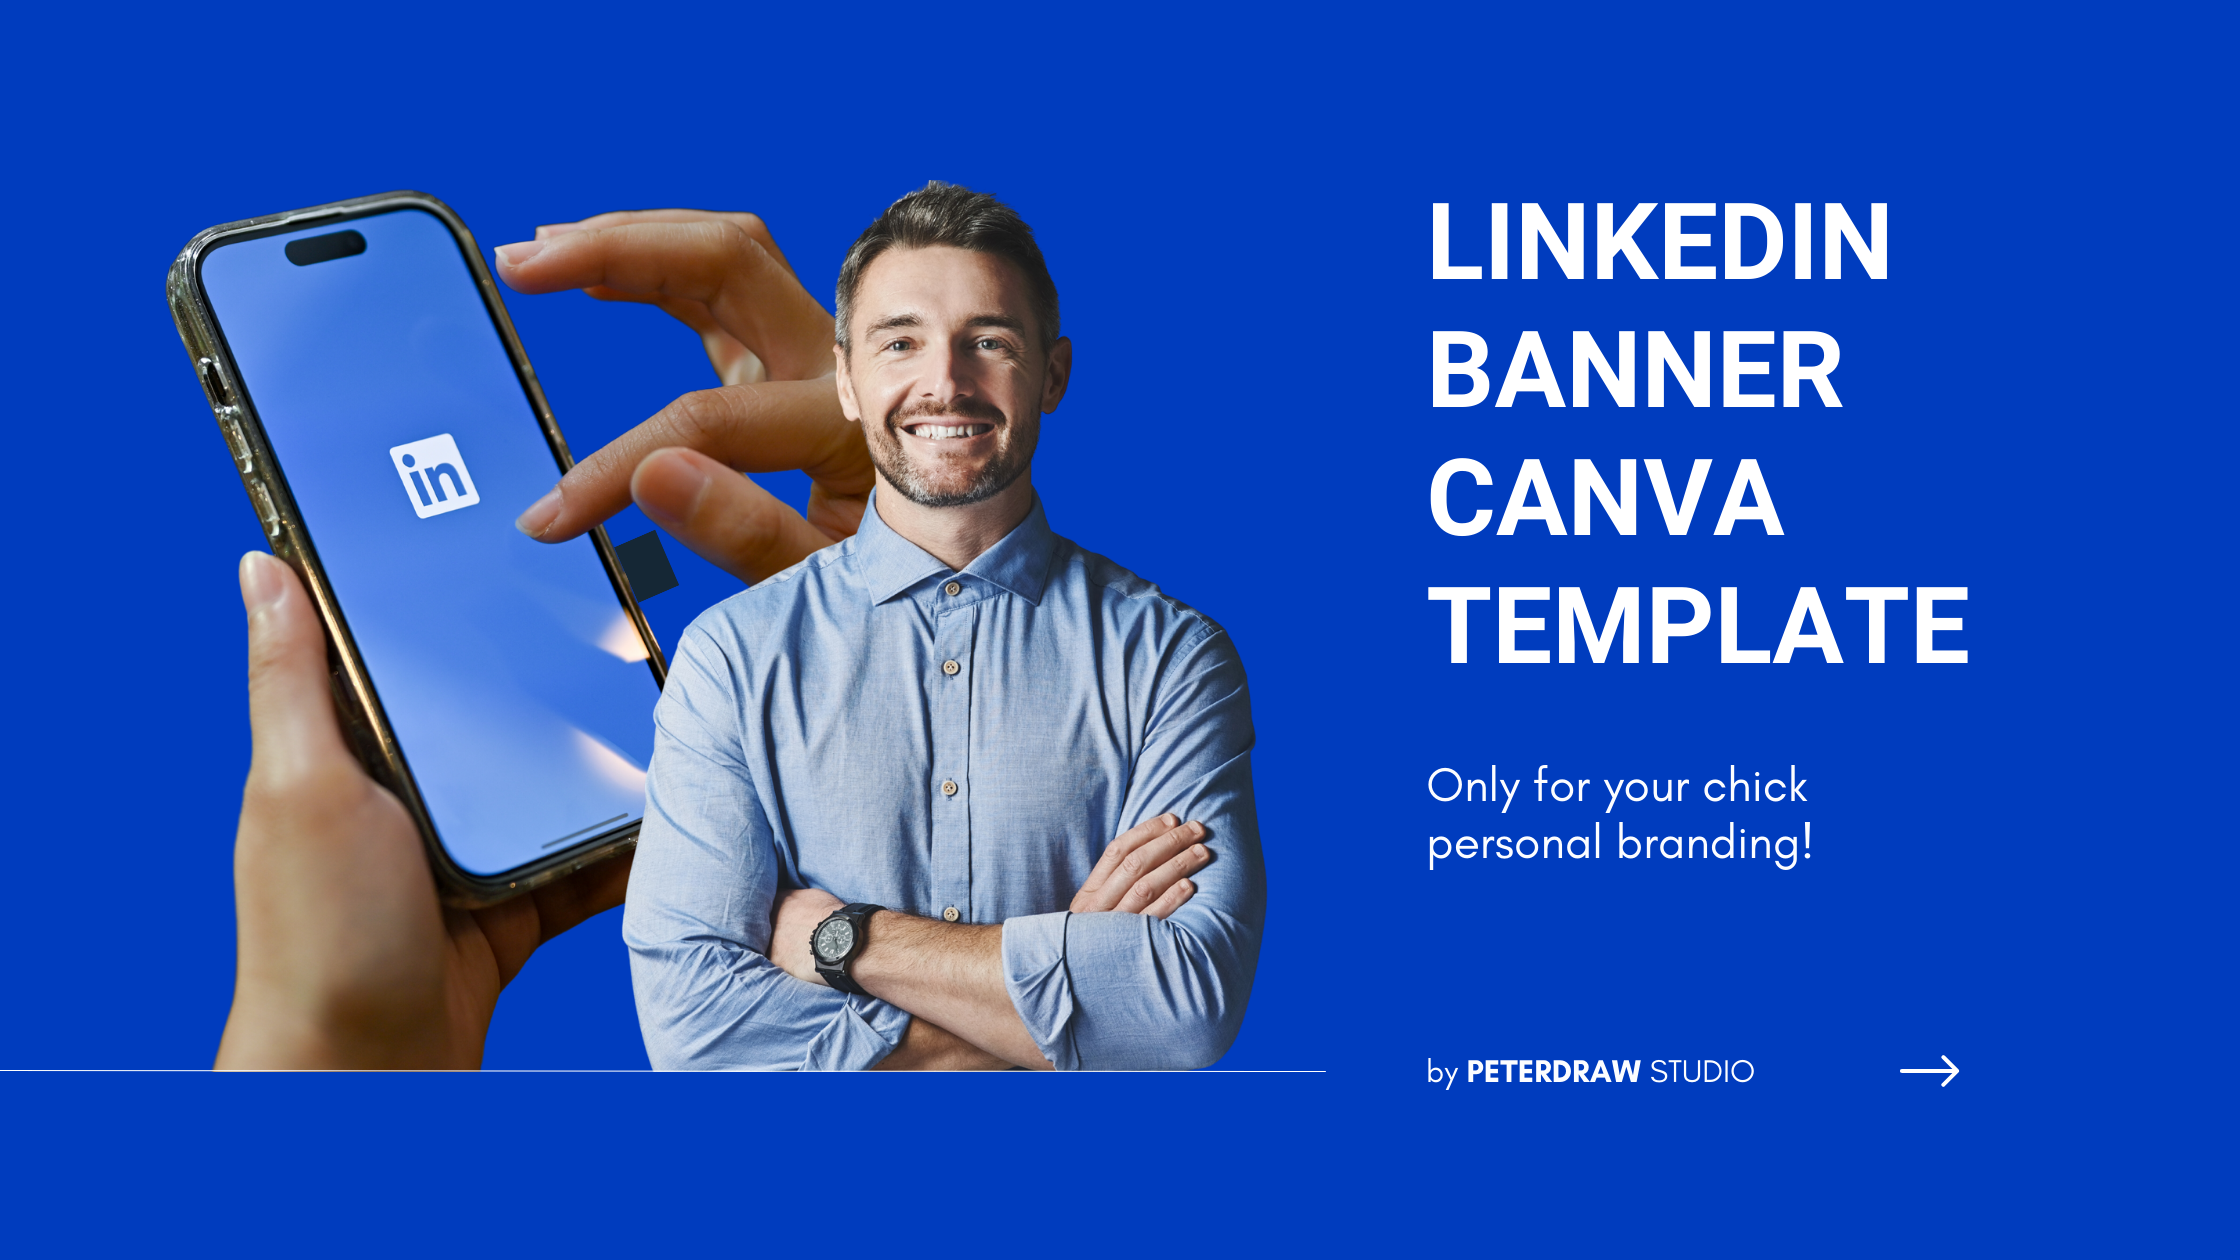 LinkedIn Banner Canva Template for Your Personal Branding